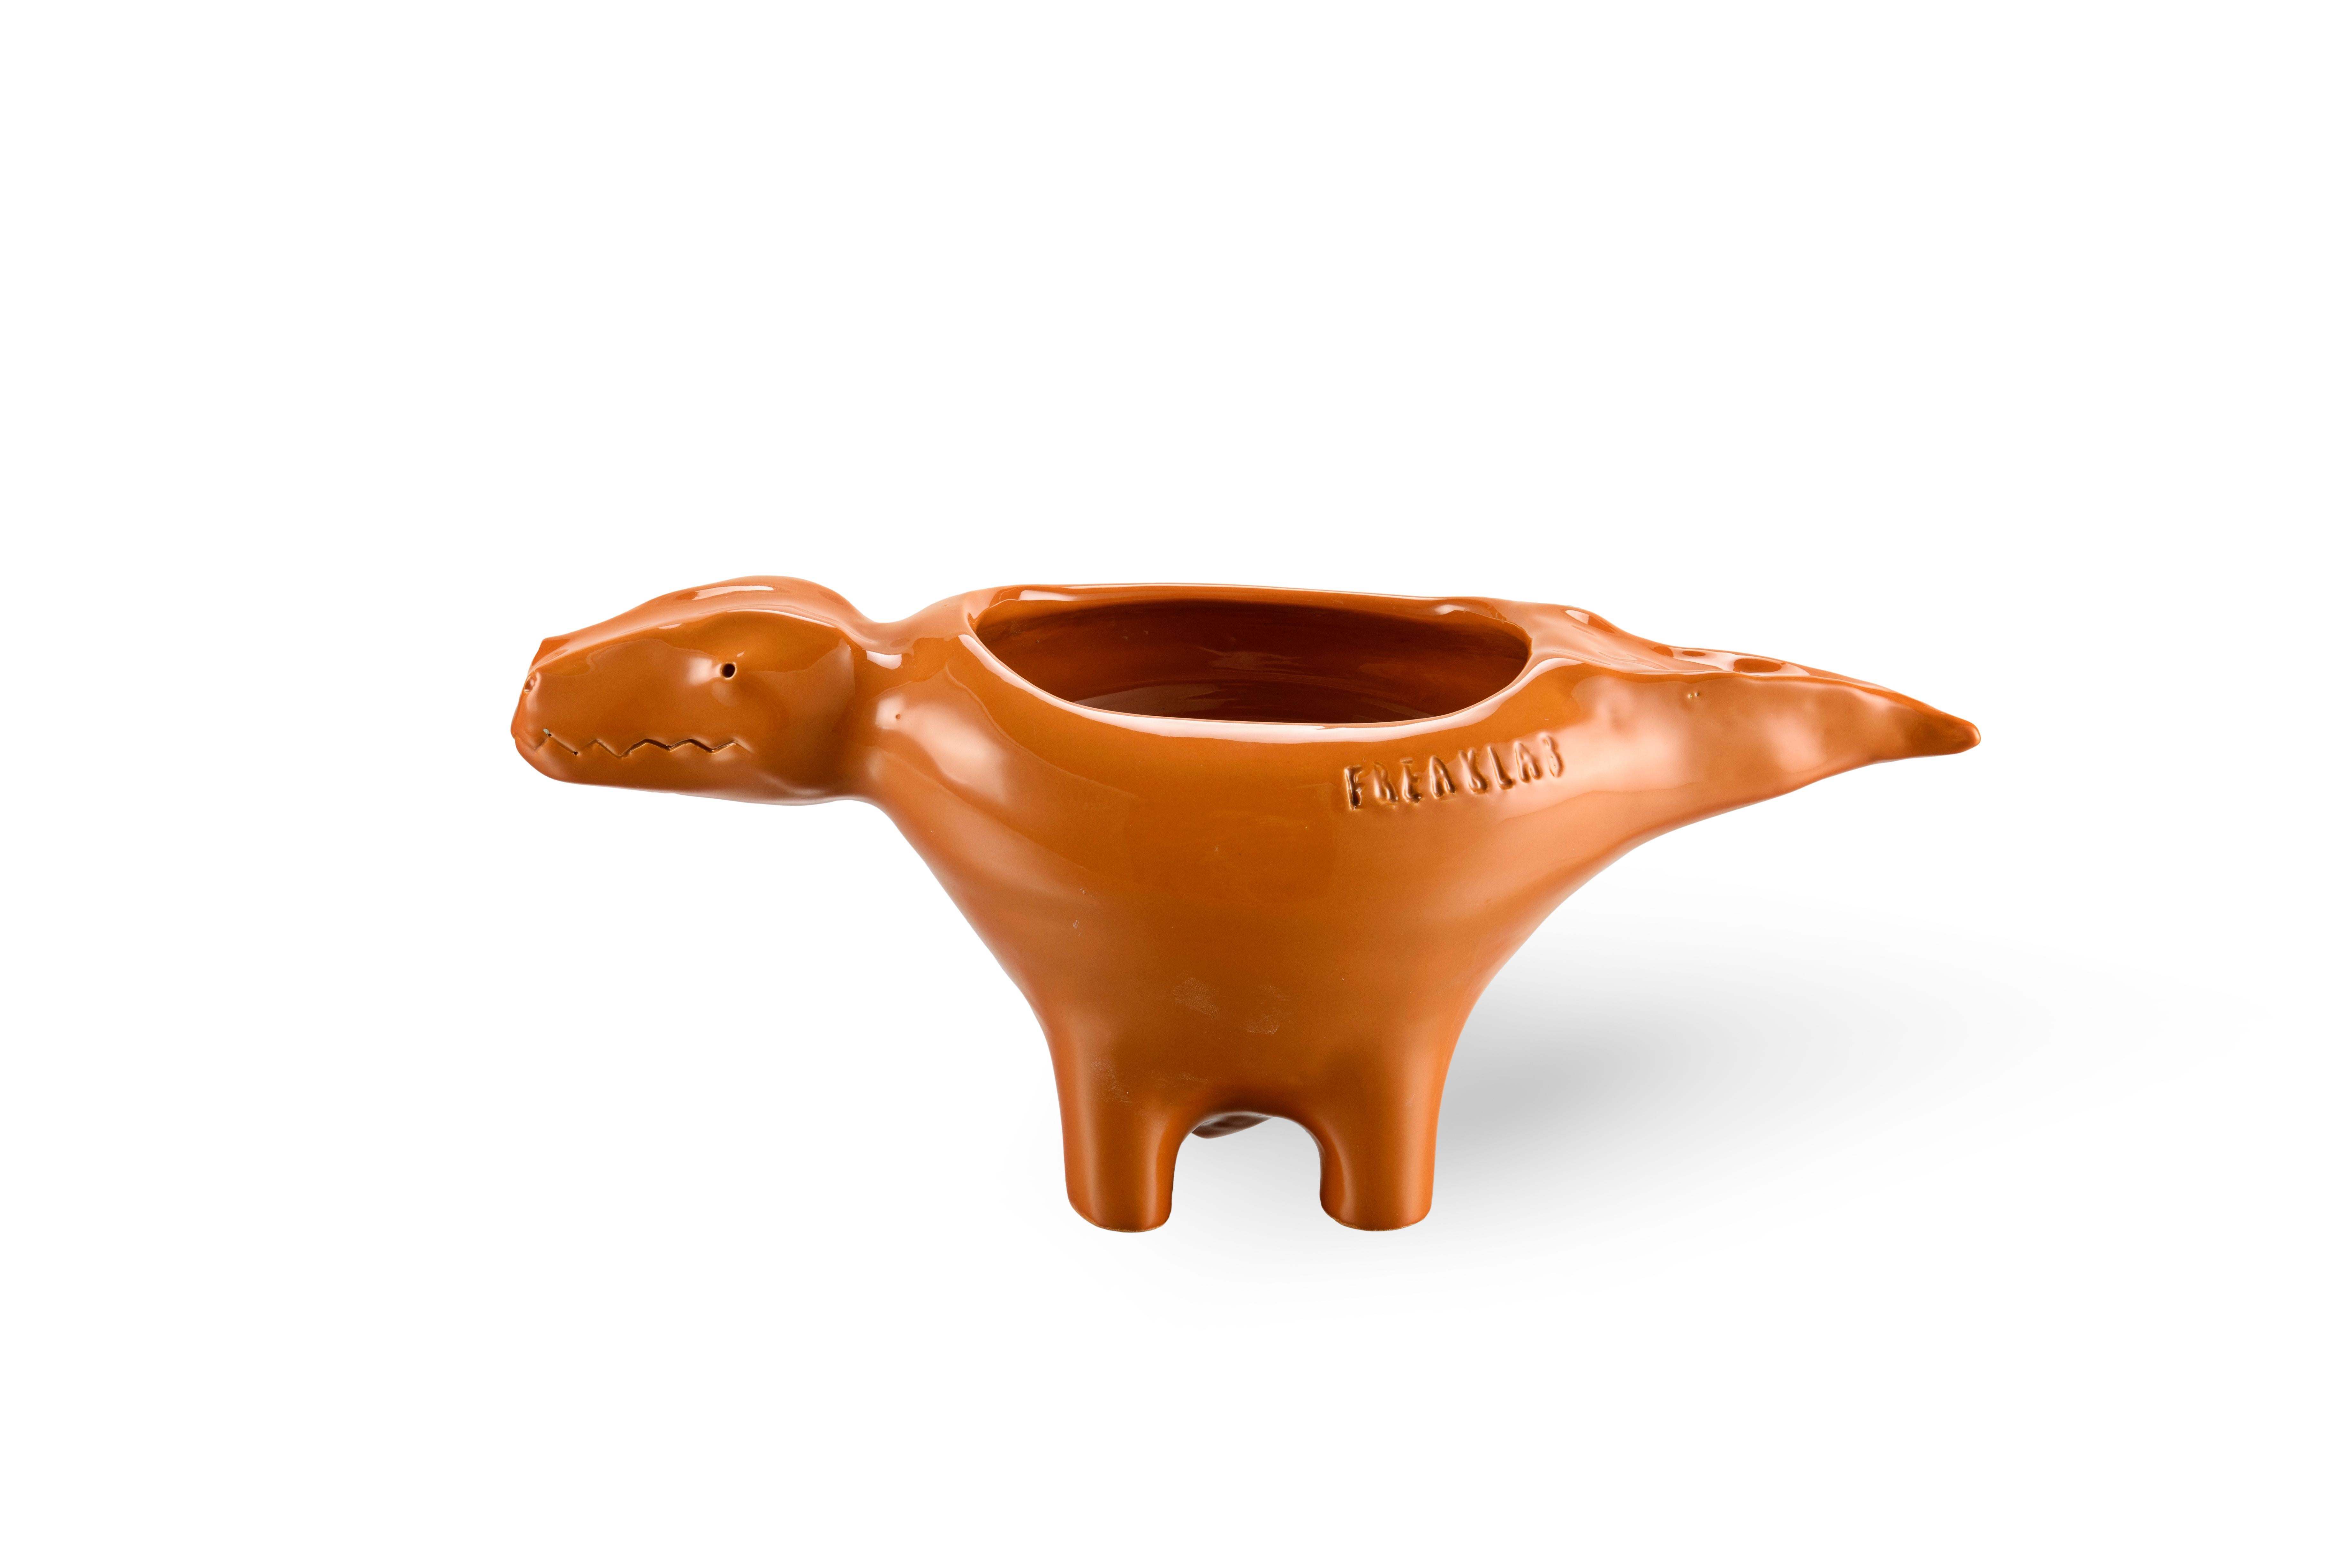 Freaklab Cocodrile Bowl Large Made Entirely by Hand in Ceramic For Sale 1